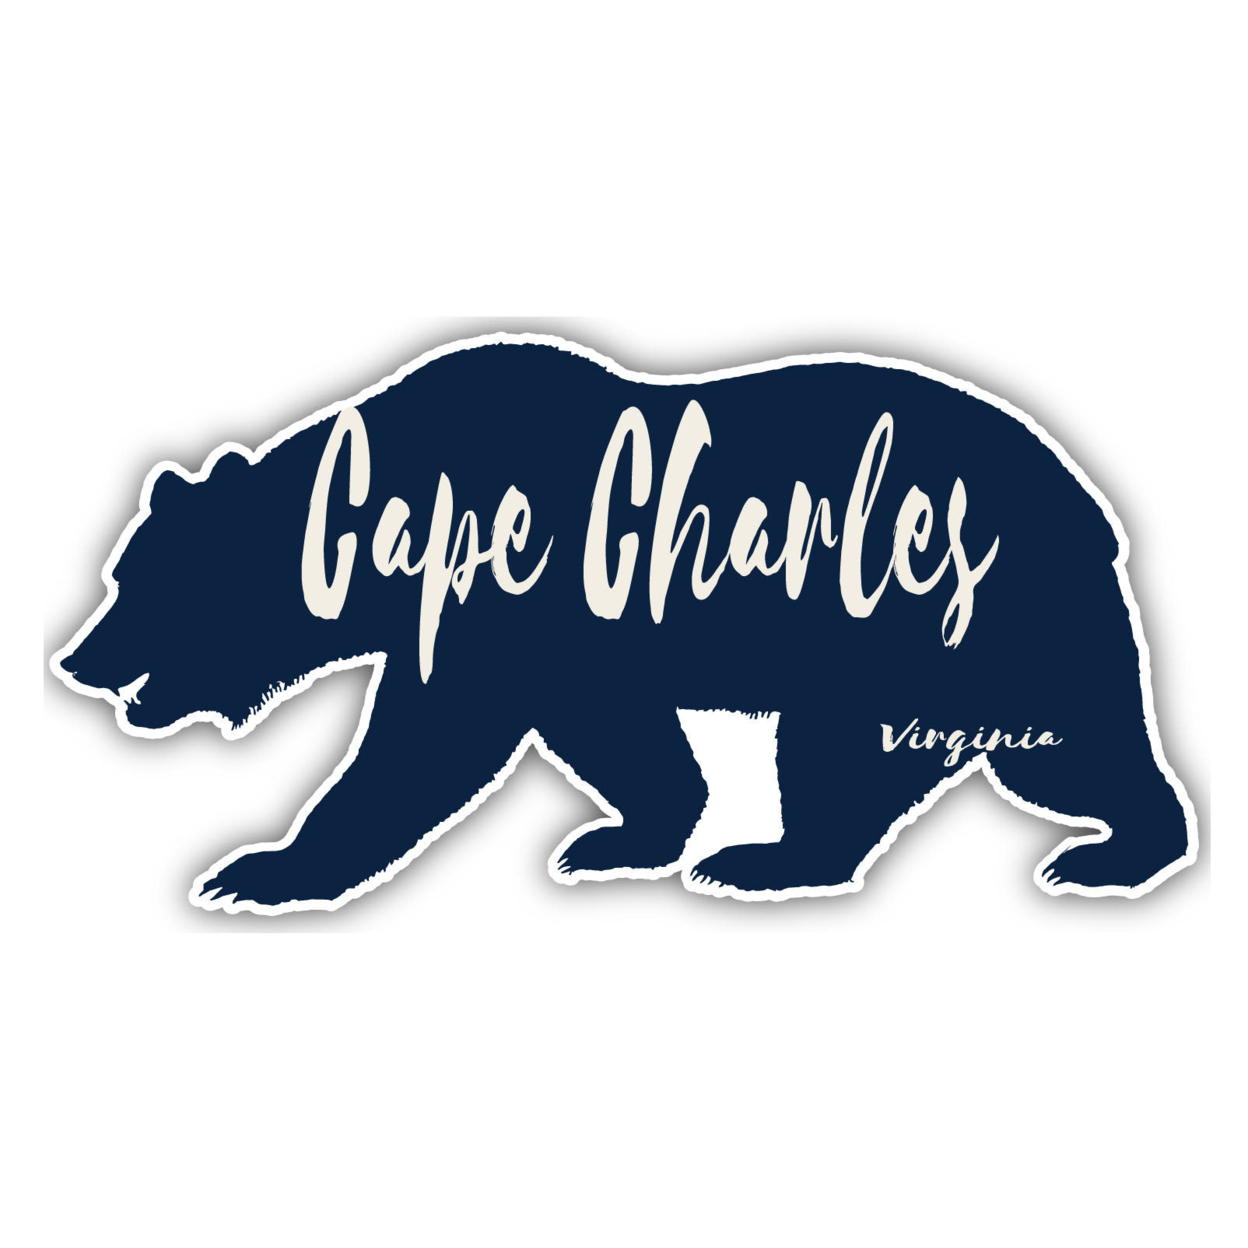 Cape Charles Virginia Souvenir Decorative Stickers (Choose Theme And Size) - 4-Pack, 6-Inch, Bear